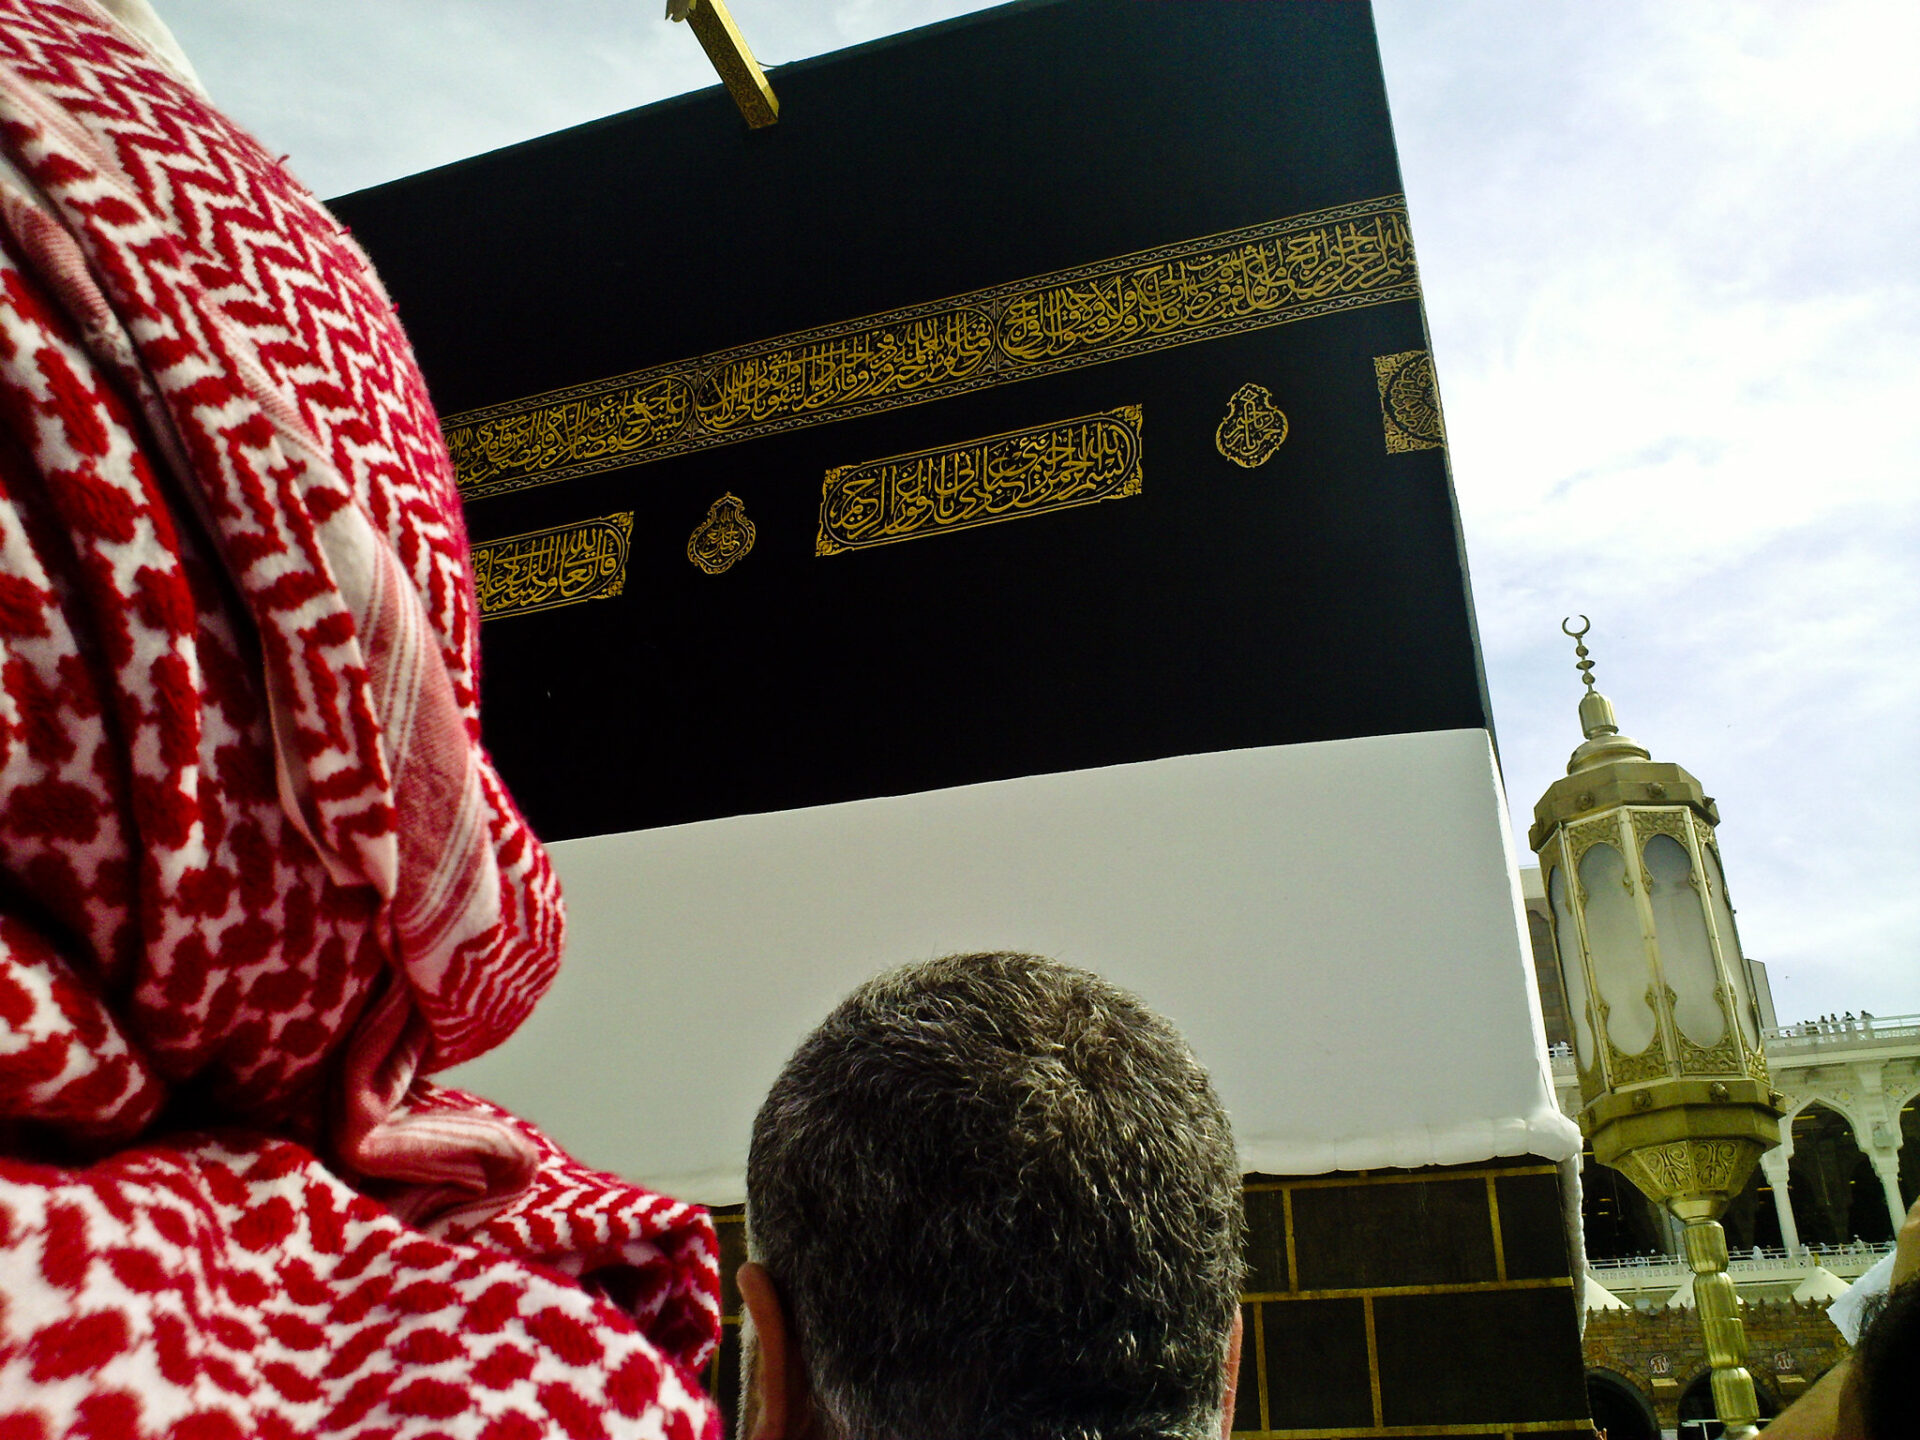 Up close with the Kaaba to perform umrah